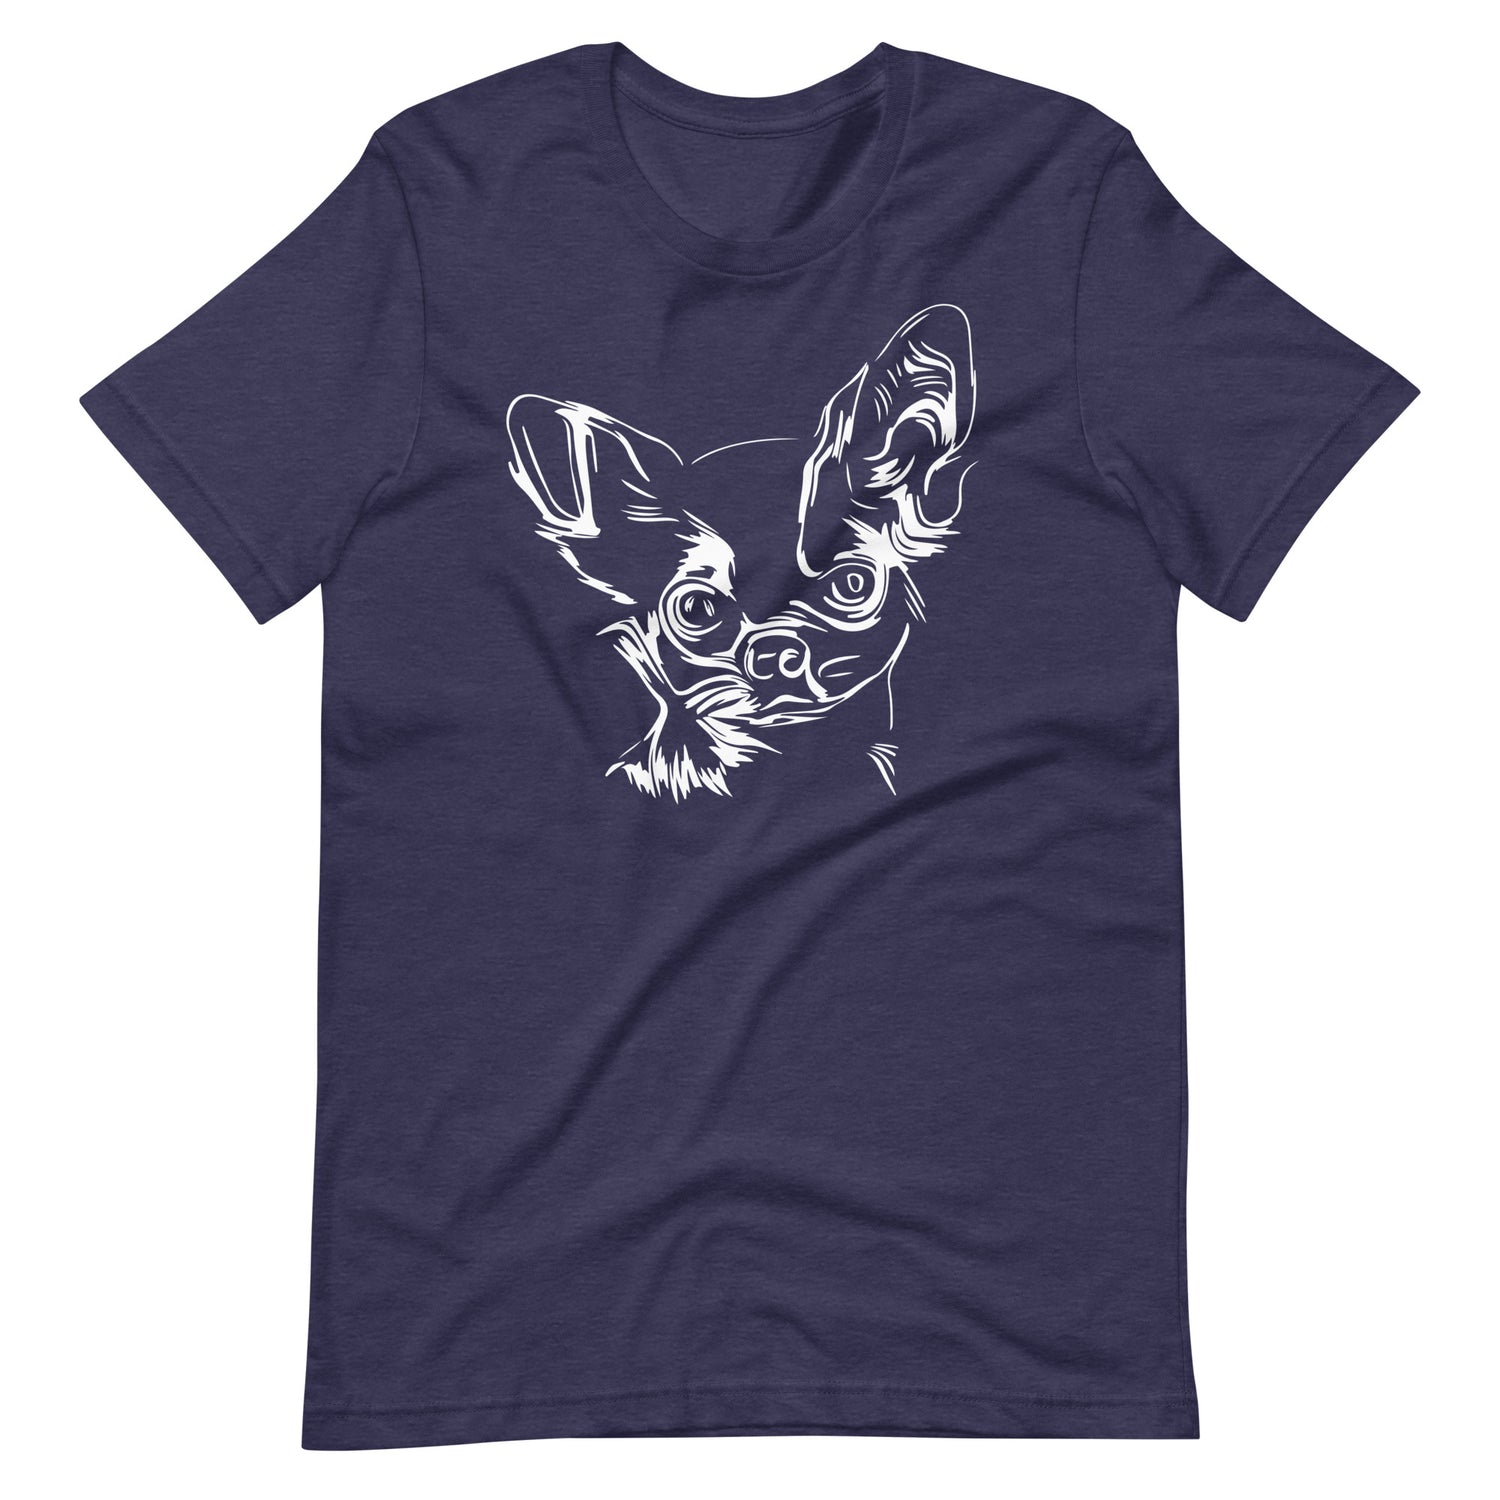 White line Chihuahua face on unisex heather midnight navy t-shirt